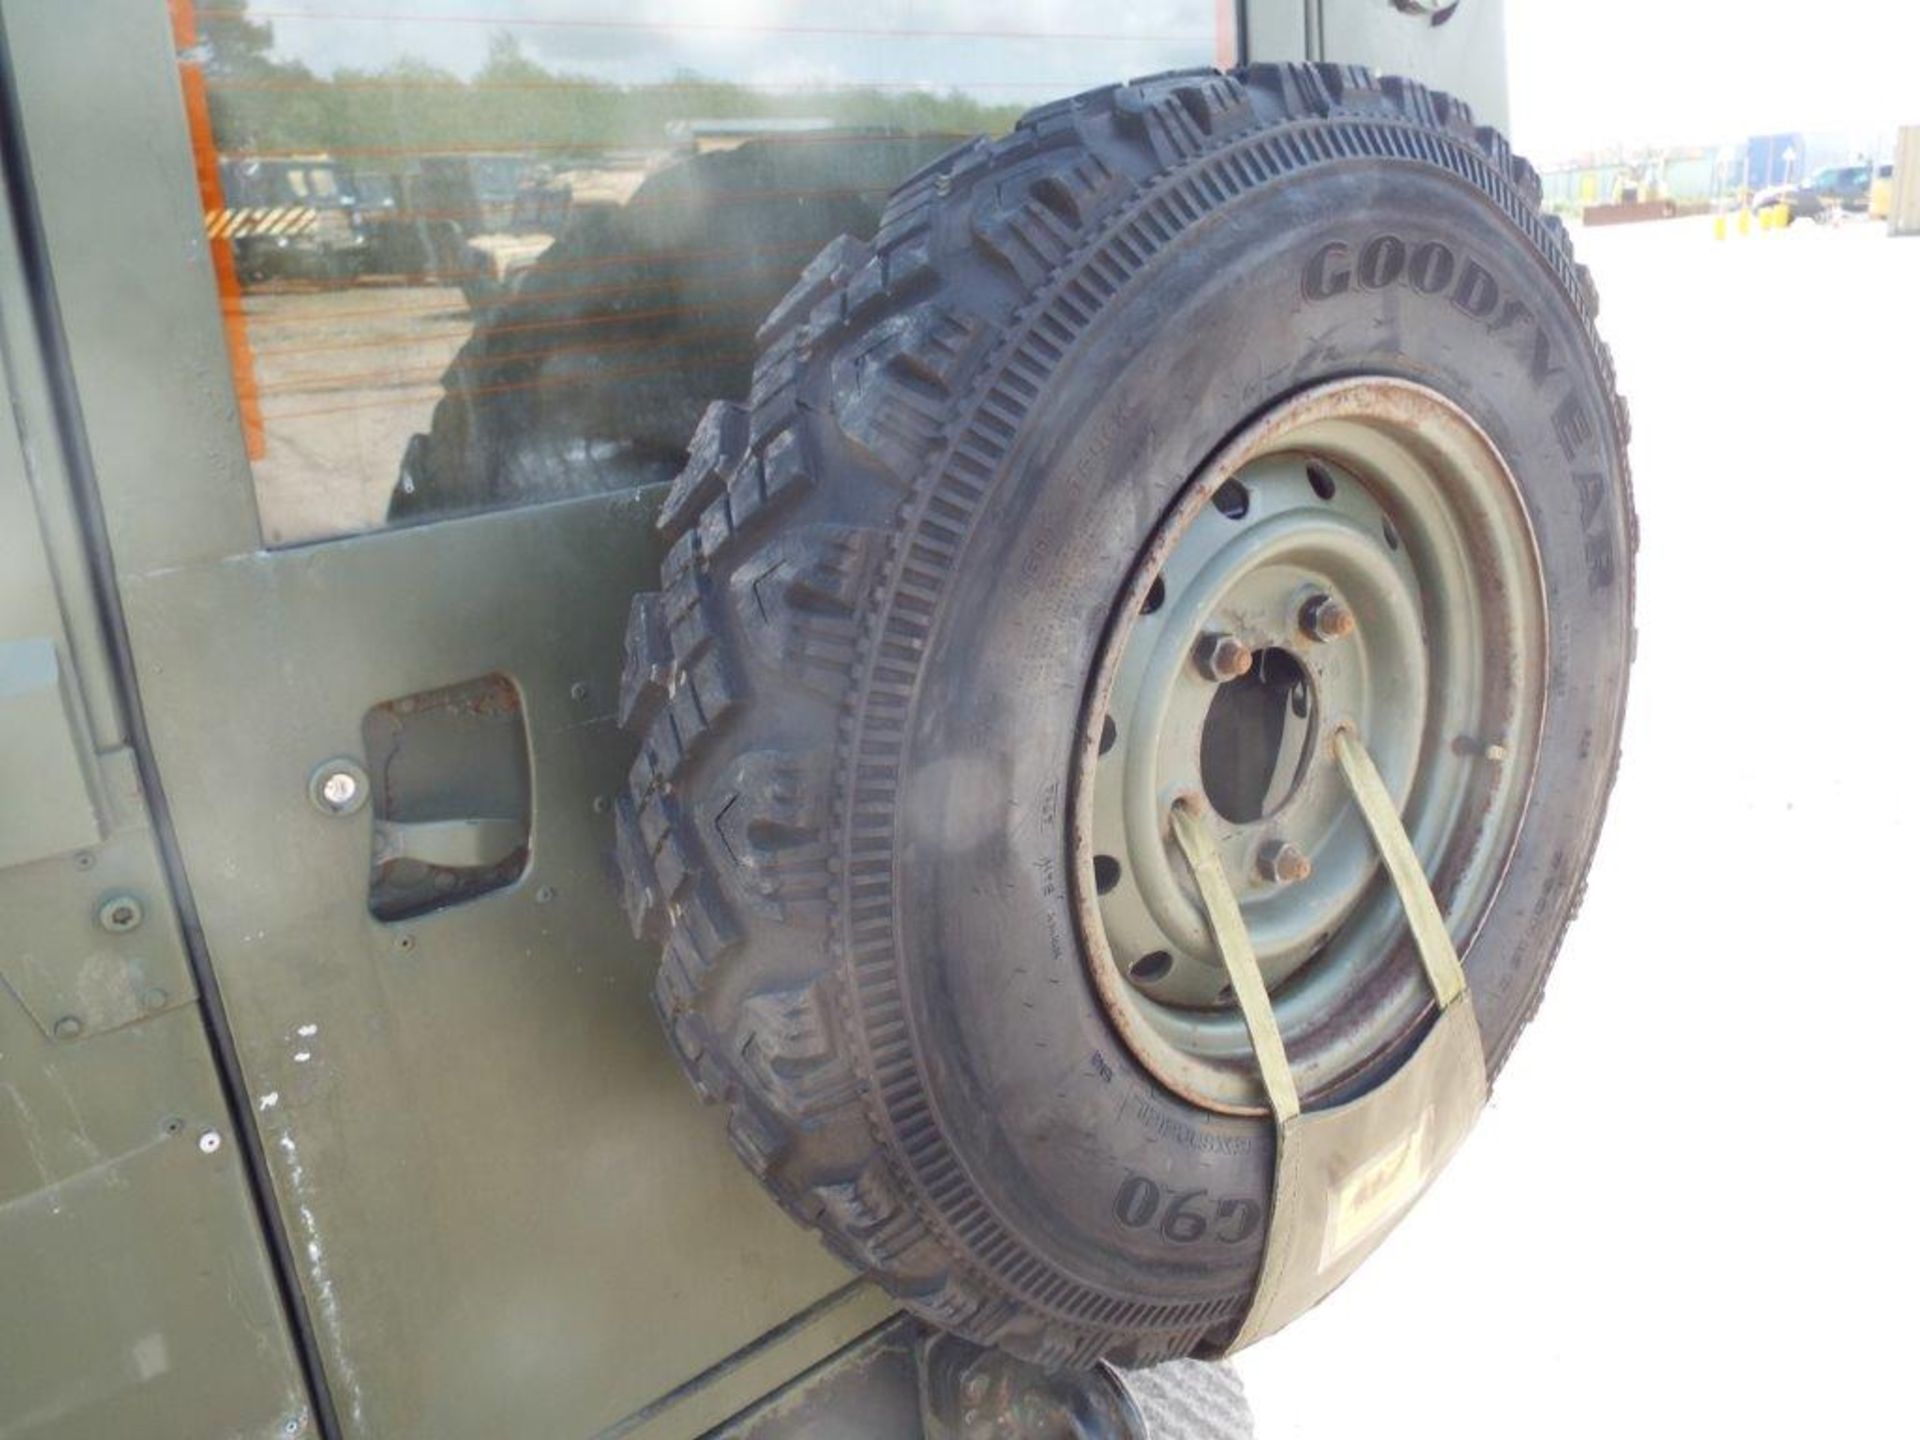 Military Specification Land Rover Wolf 110 Hard Top - Image 24 of 26